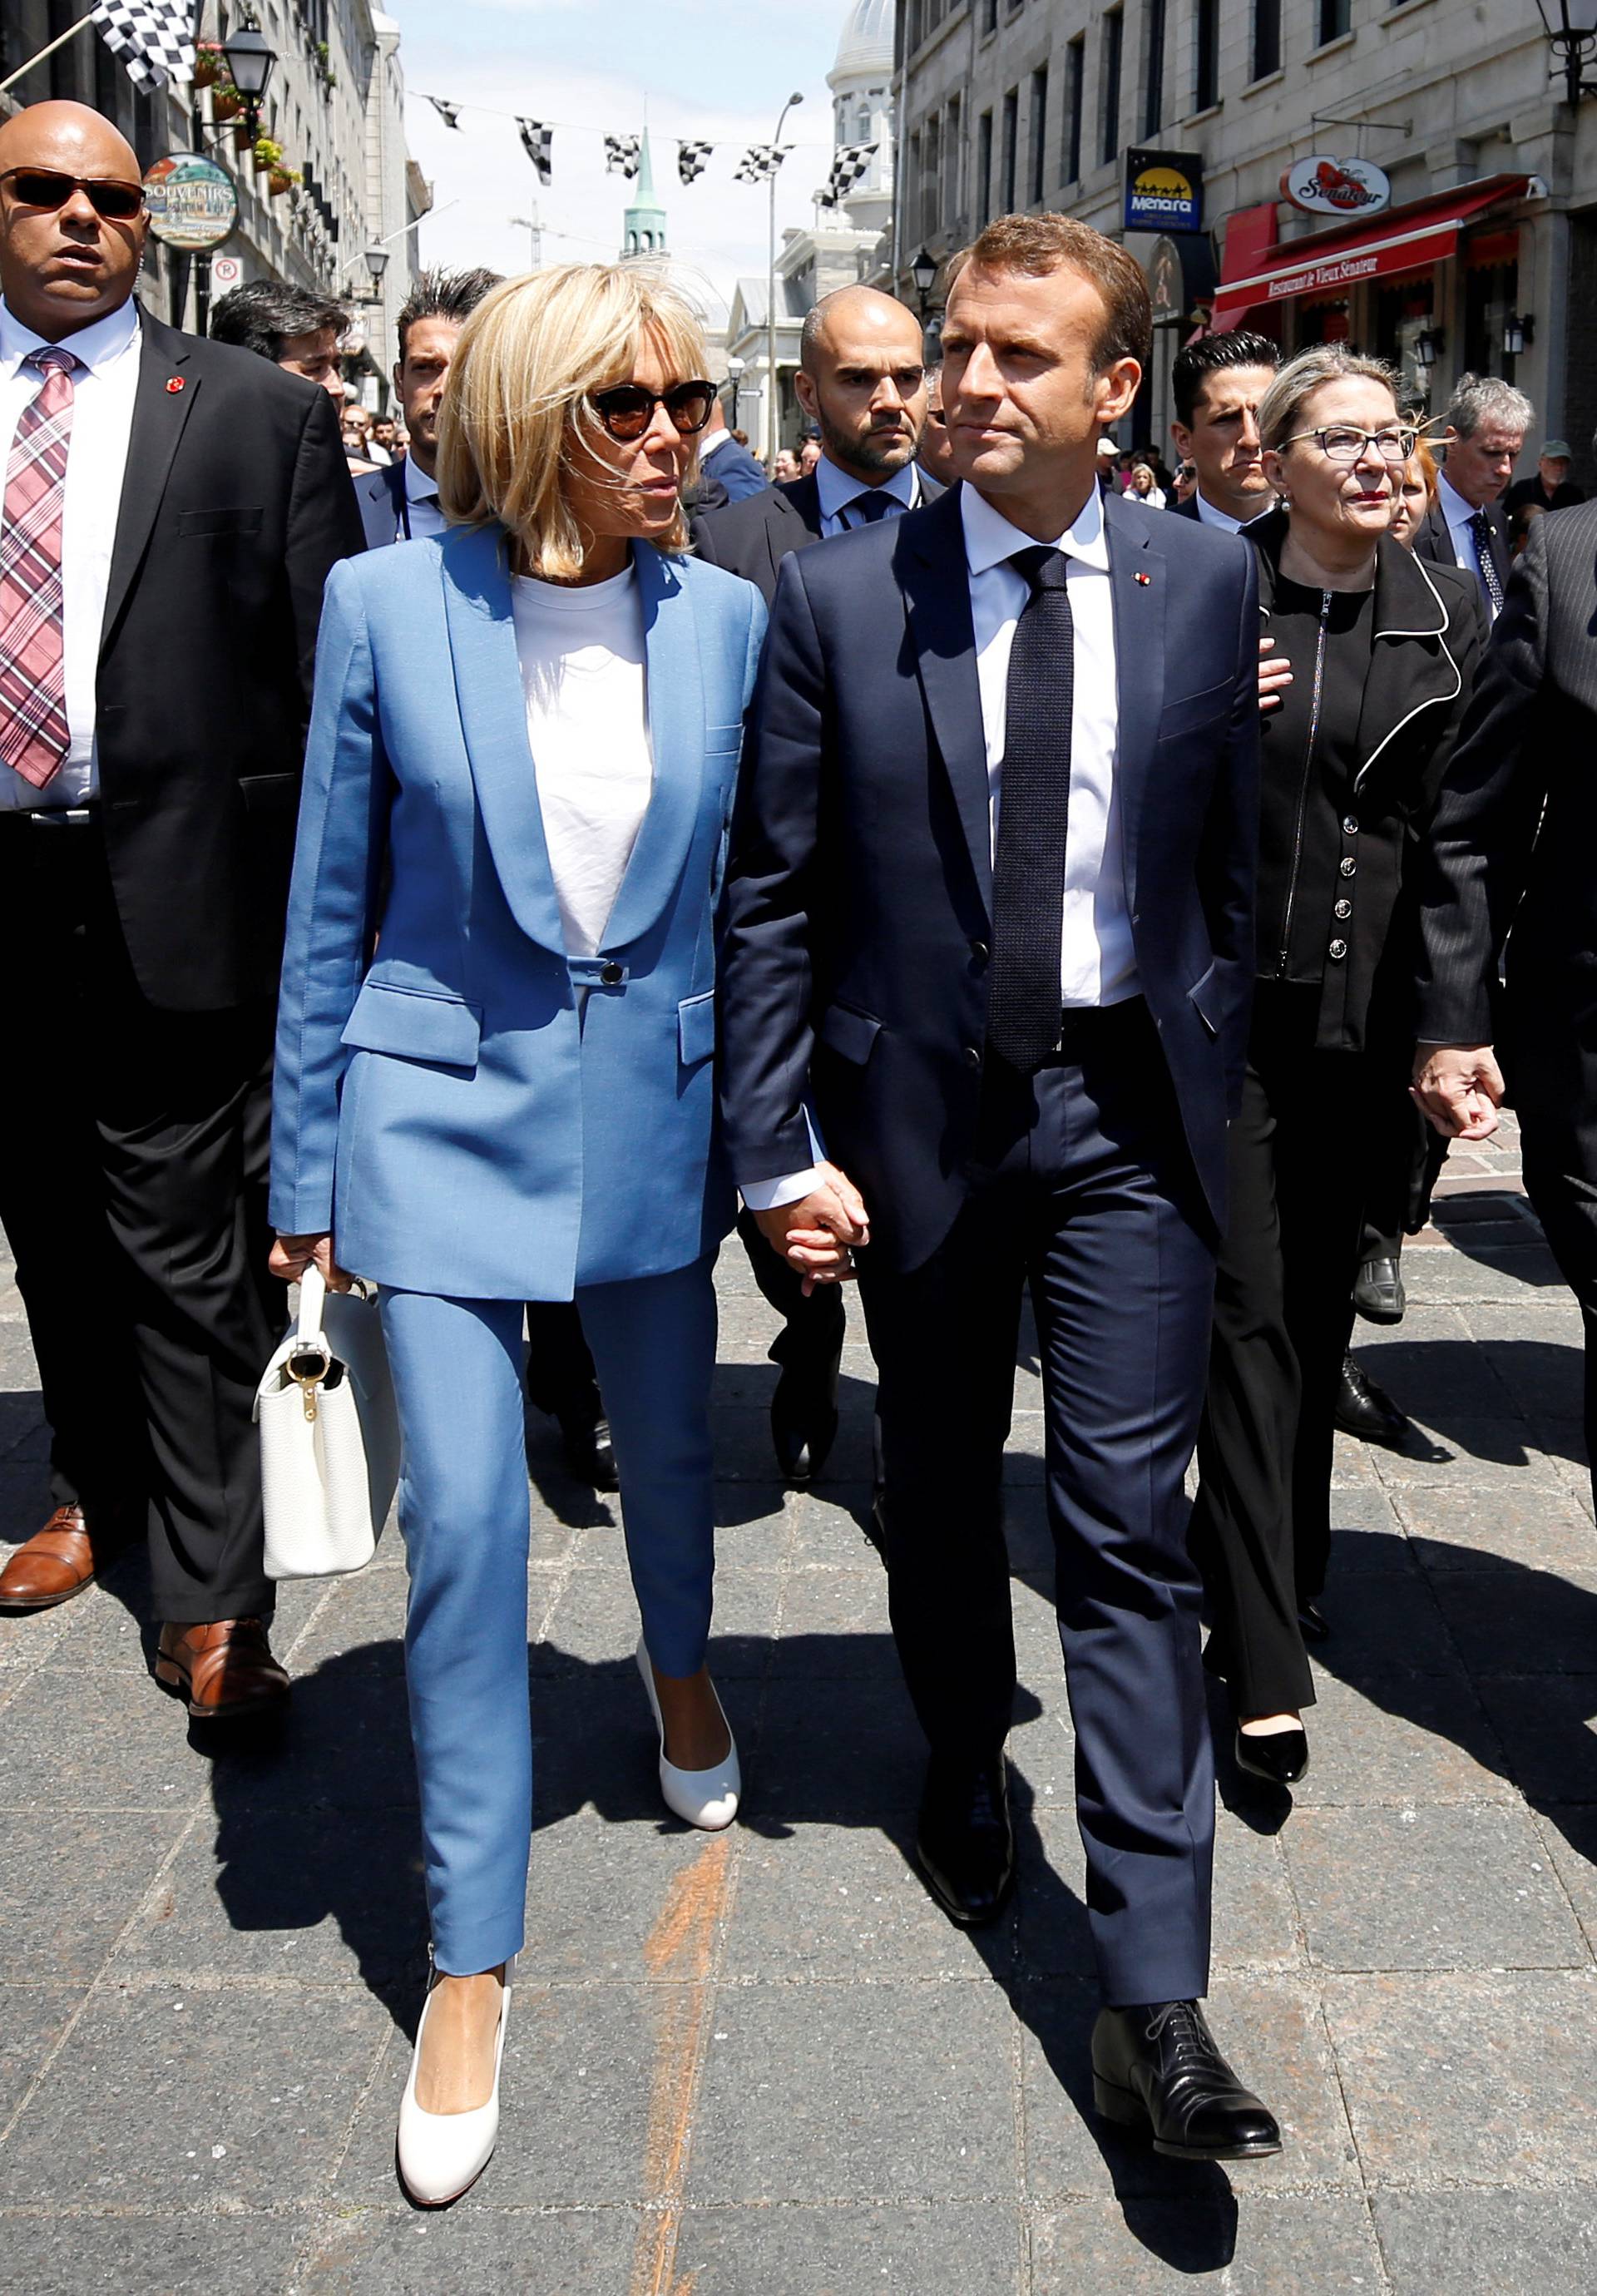 French President Emmanuel Macron and his wife Brigitte Macron tour Old Montreal in Montreal